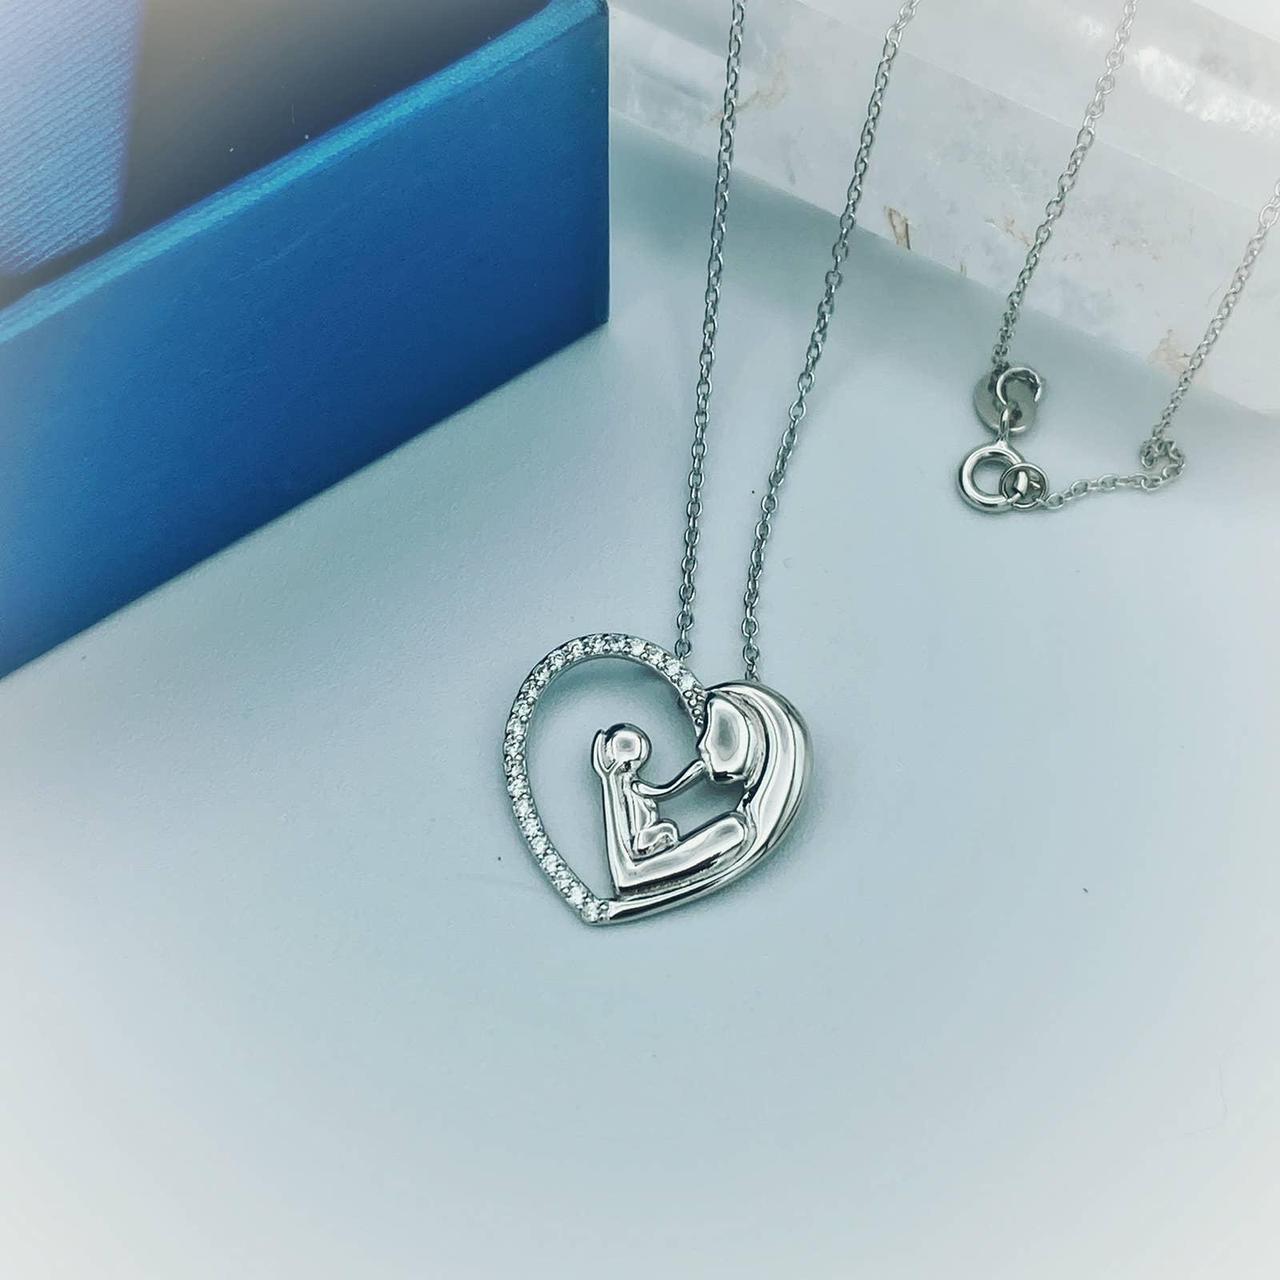 Stylish Mom and Child Necklace: A Symbol of Love and Connection